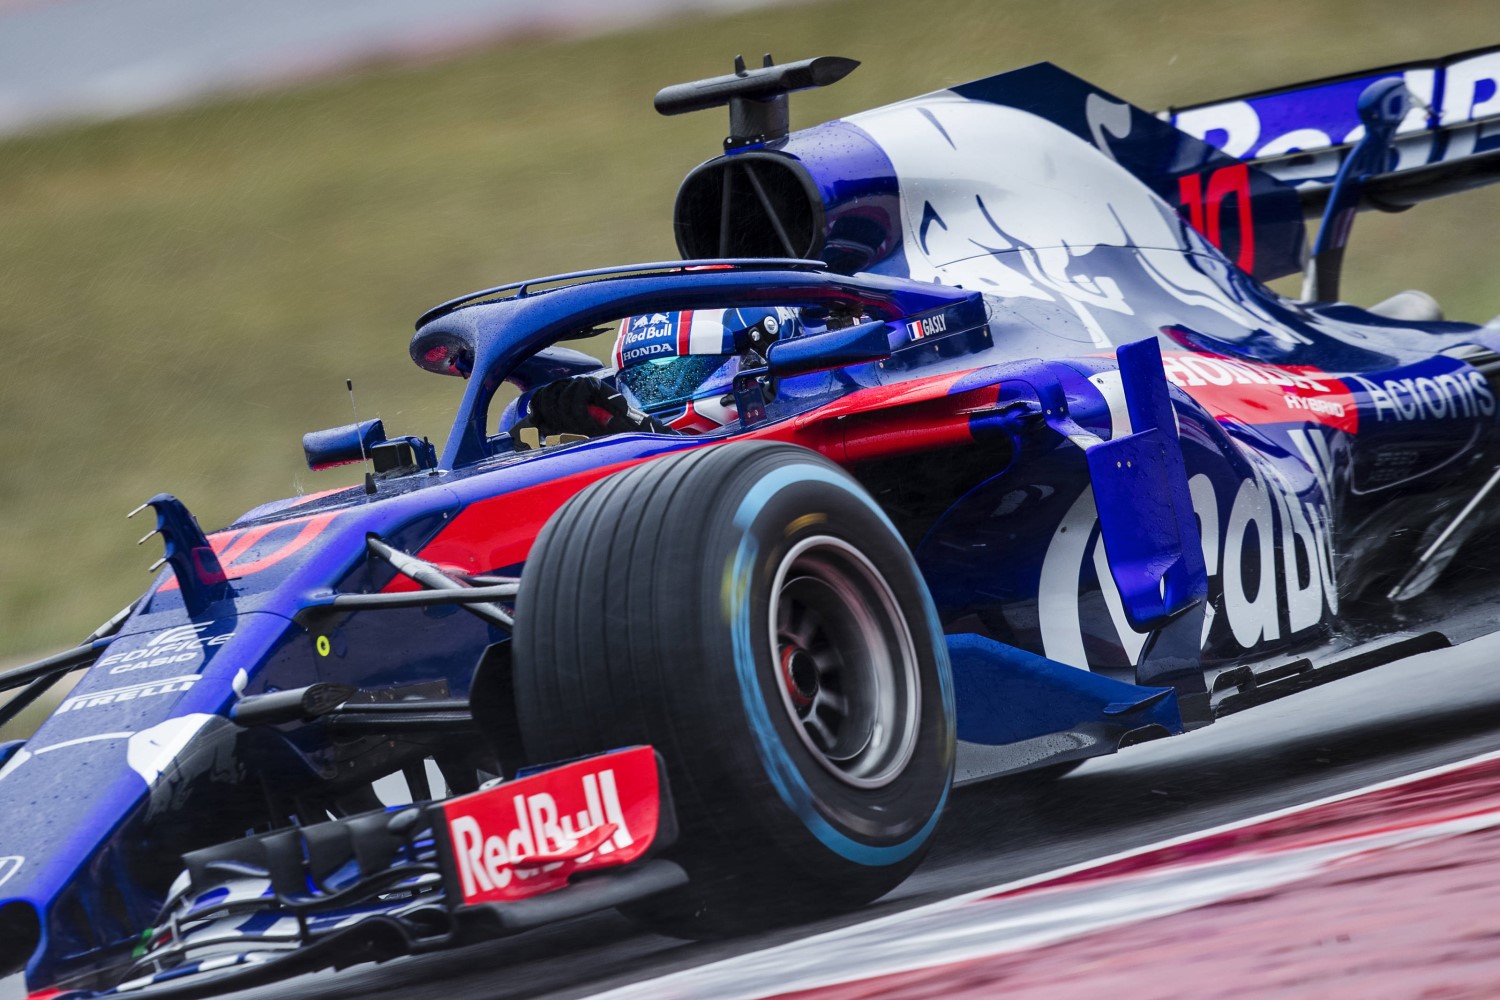 The new Toro Rosso on track in Barcelona